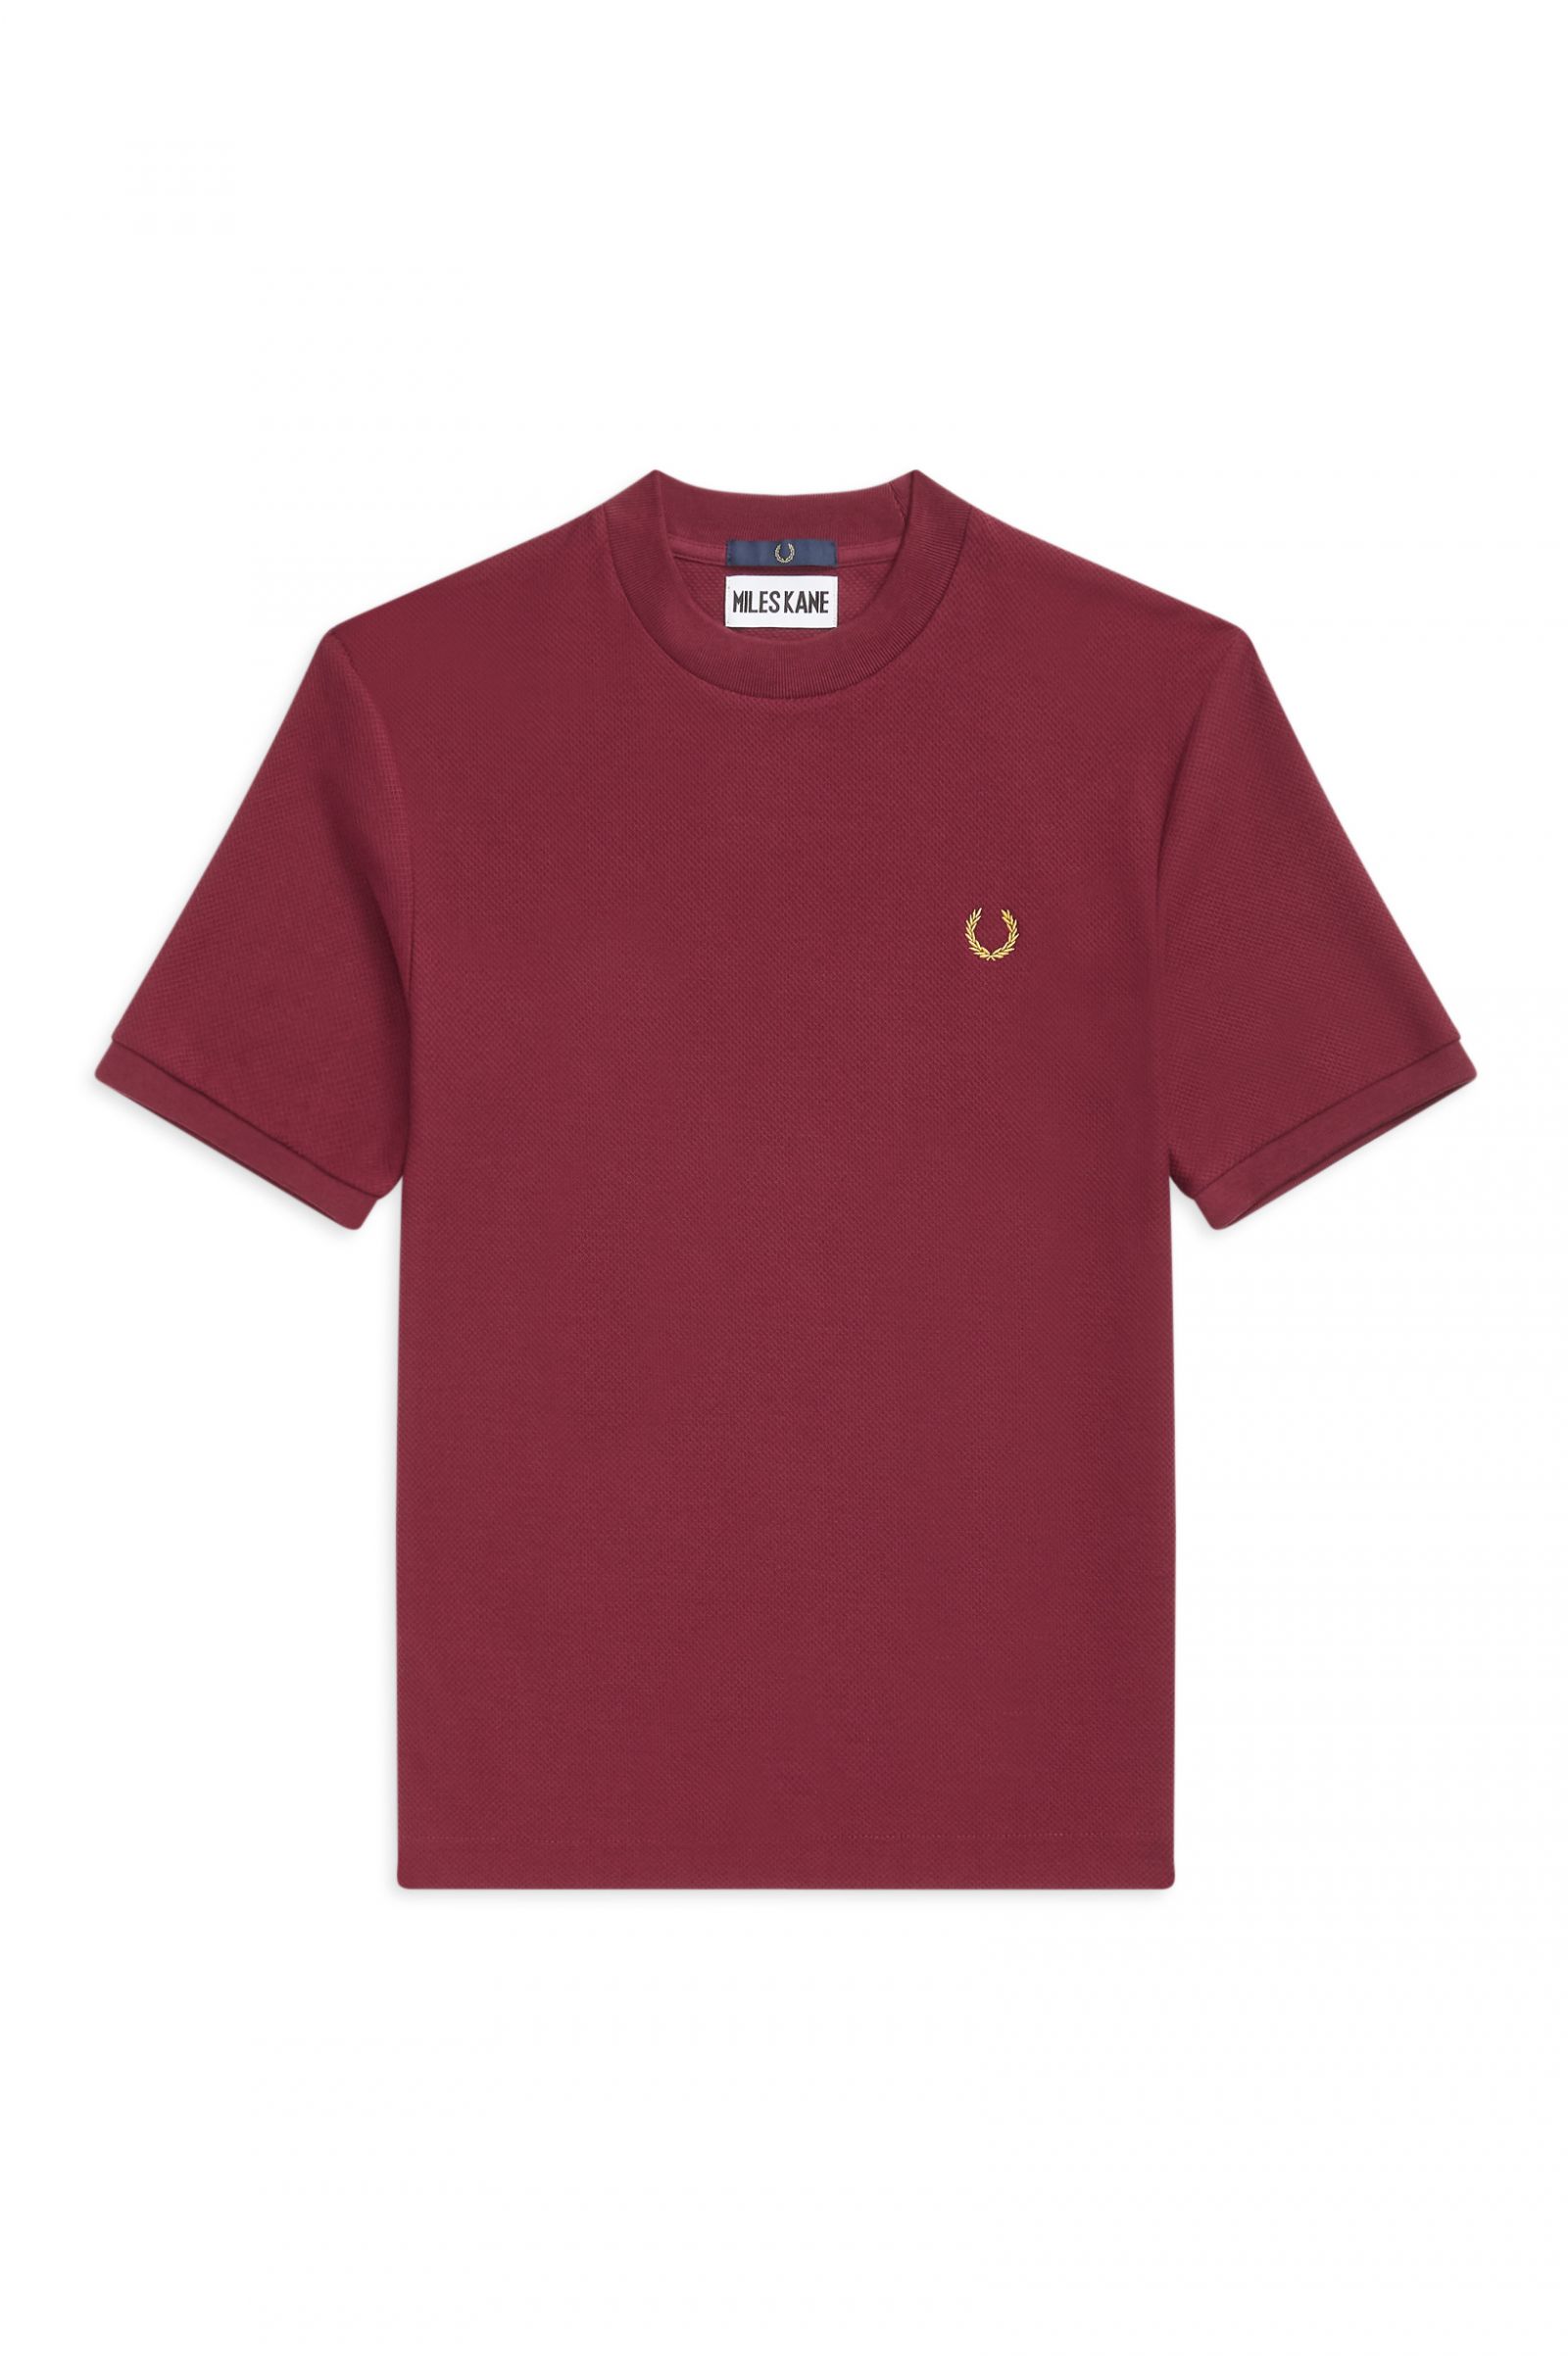 miles kane fred perry shirt